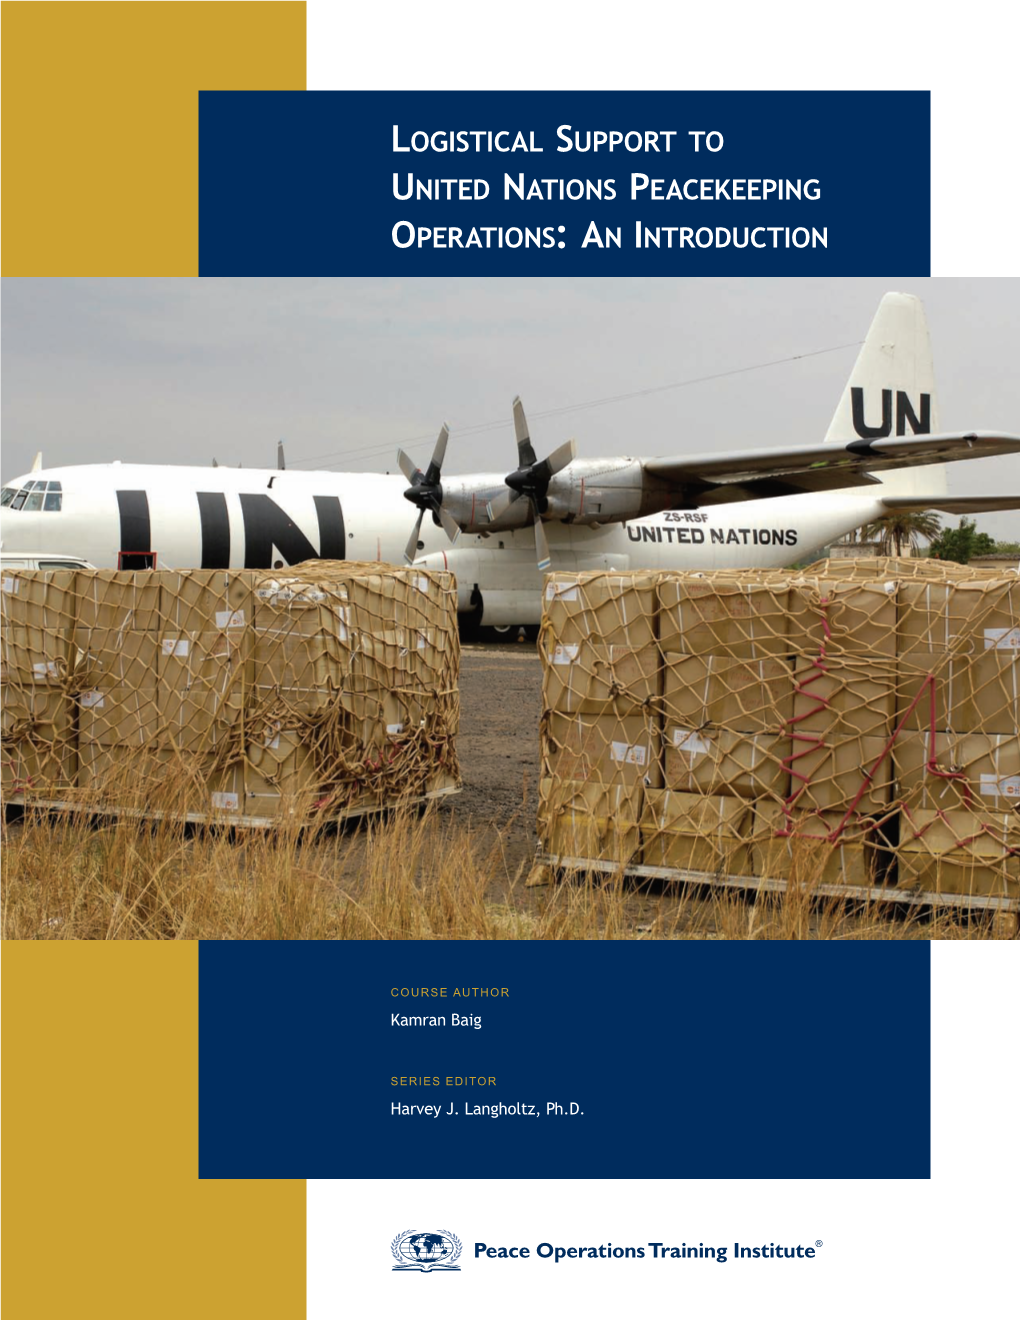 Logistical Support to United Nations Peacekeeping Operations: an Introduction